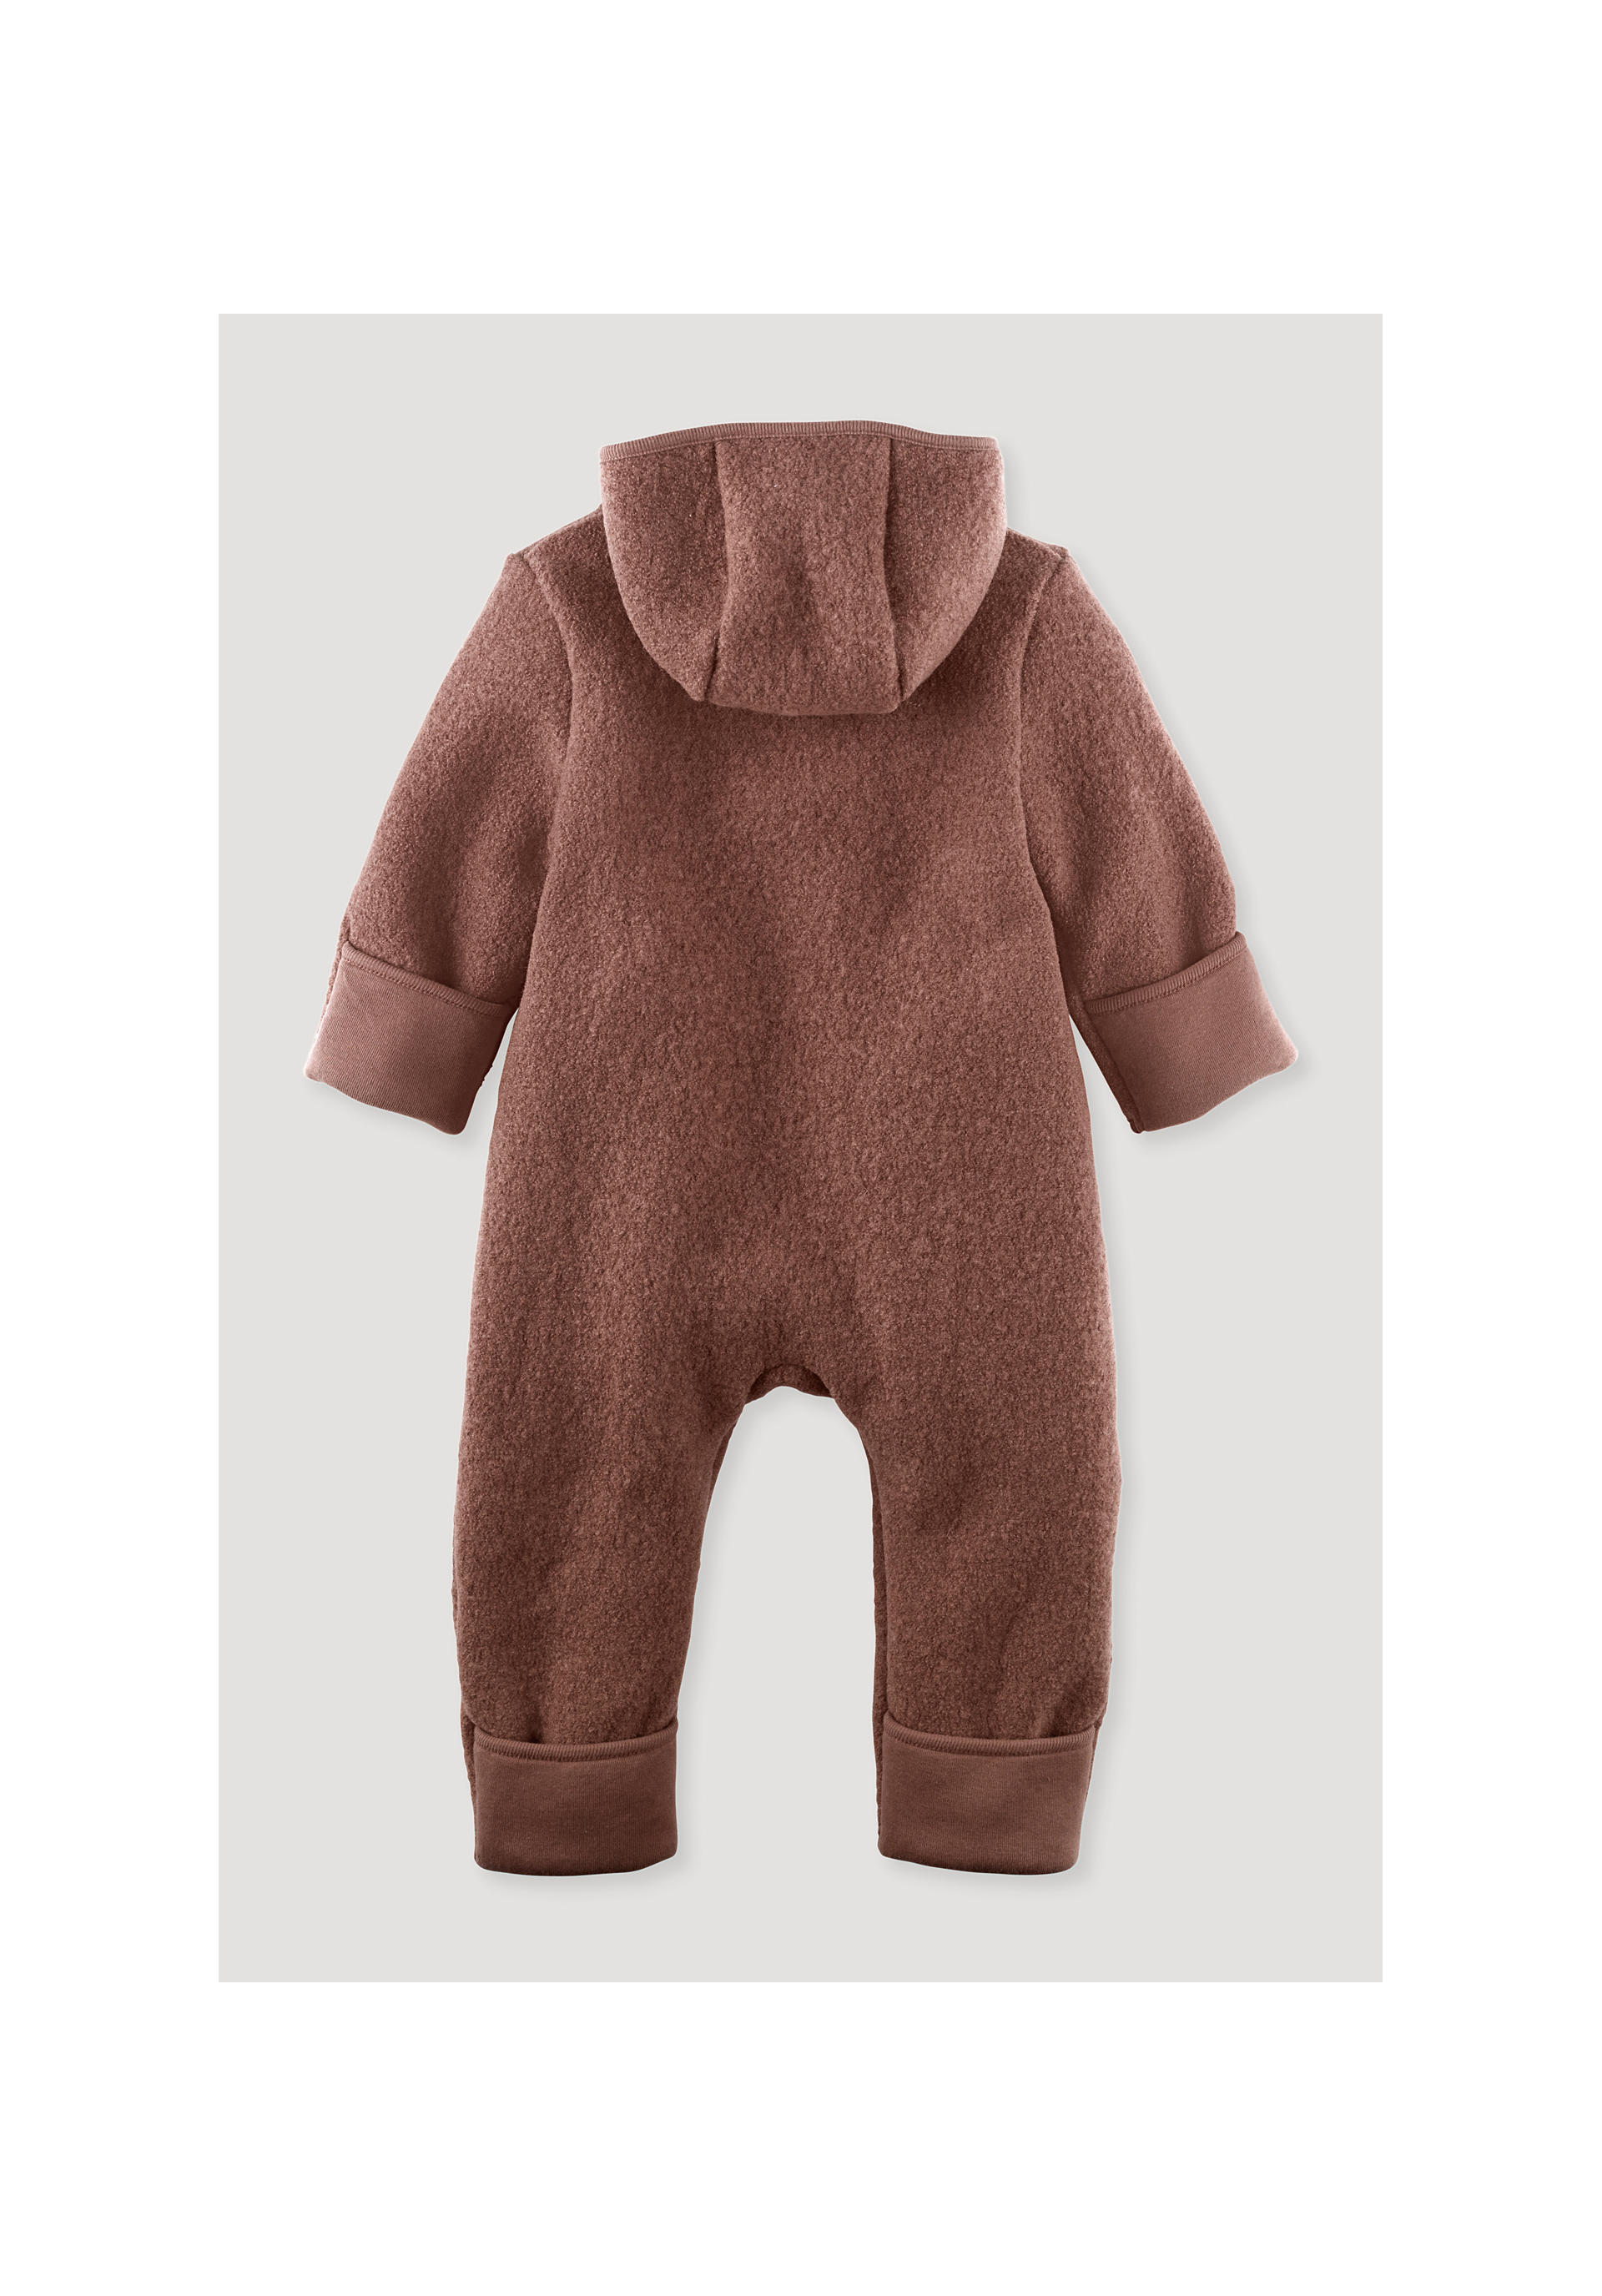 Dolphin Ideal as a Baby Winter Overall Halfen® Wollwalk Baby Overall Made of Organic Natural Virgin Wool 100% Made in Germany Colour 